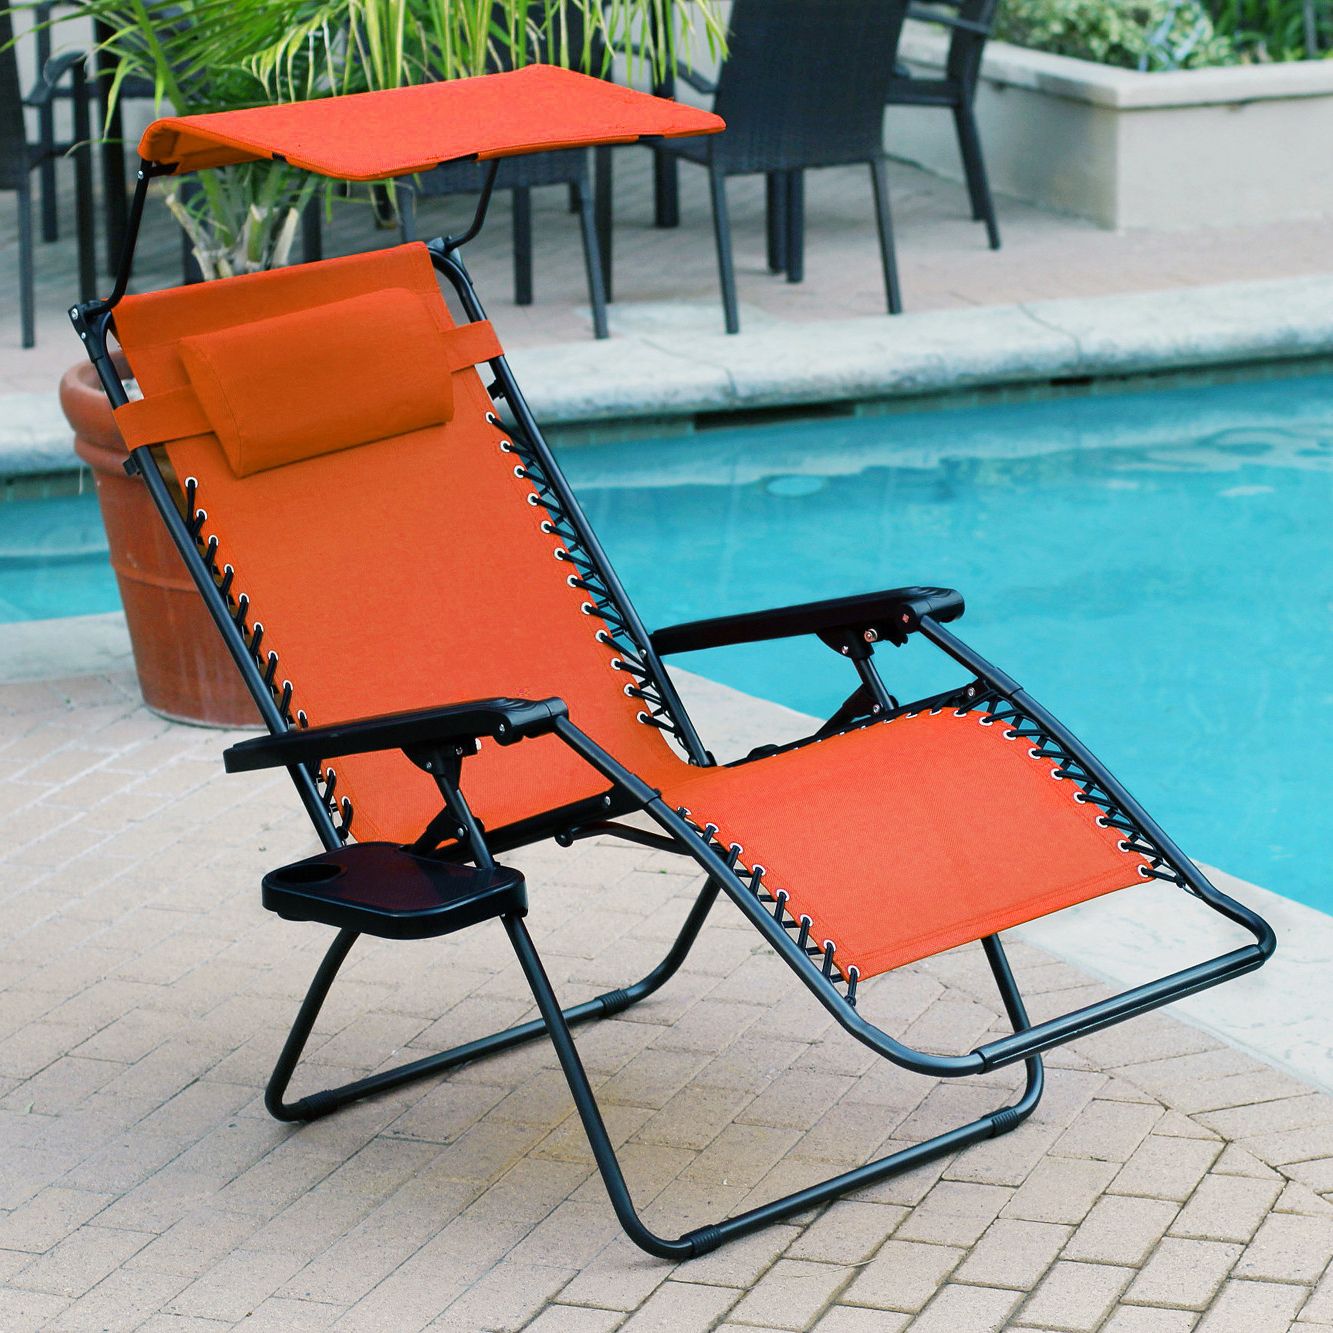 Preferred The 4 Best Zero Gravity Chairs On The Market Reviews & Guide For Garden Oversized Chairs With Sunshade And Drink Tray (View 12 of 25)